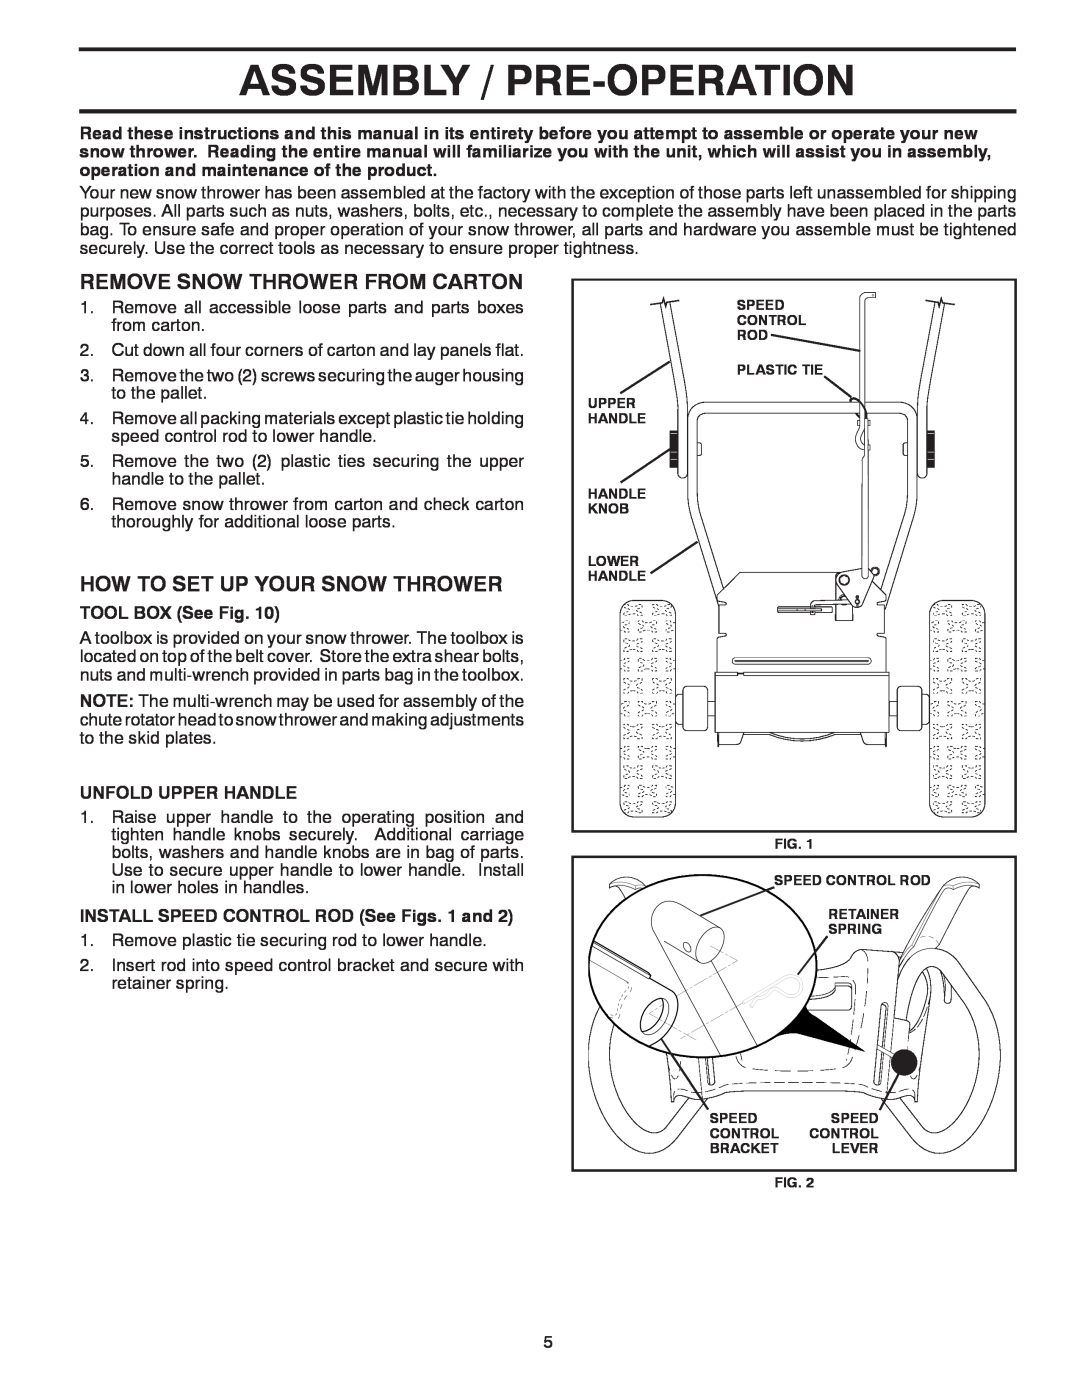 Poulan 421916 owner manual Assembly / Pre-Operation, Remove Snow Thrower From Carton, How To Set Up Your Snow Thrower 